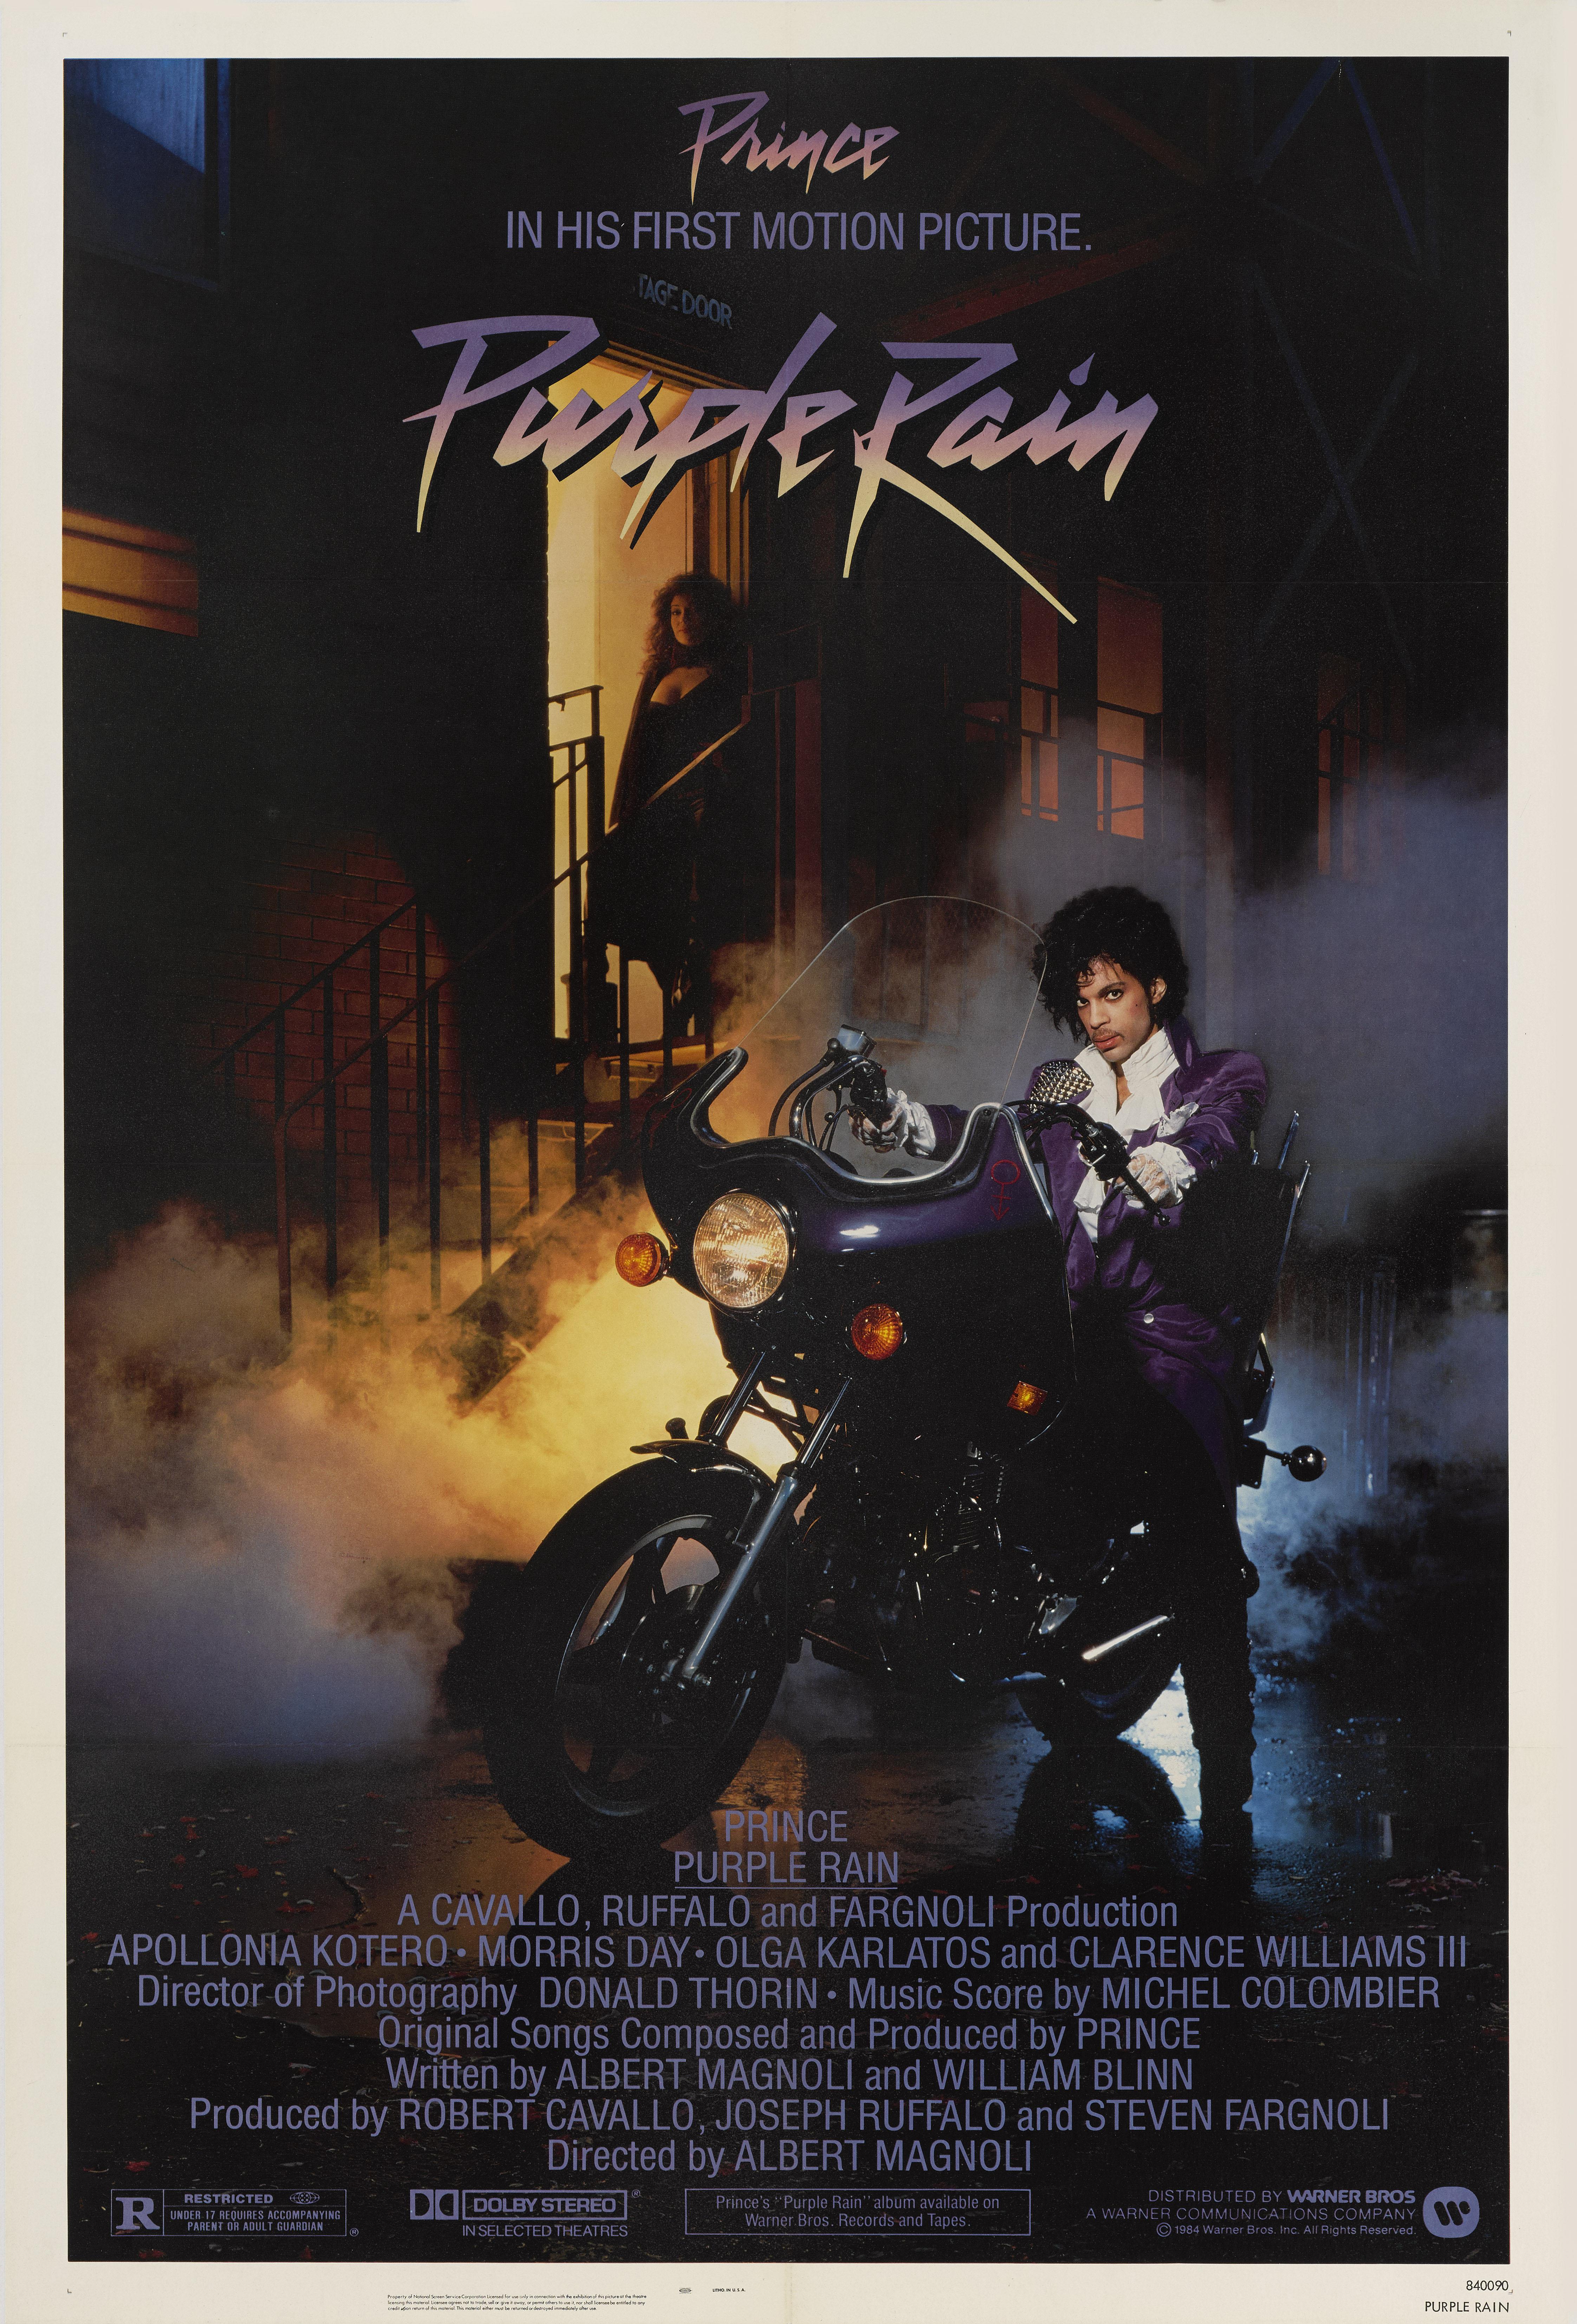 Original US film poster for the 1984 music drama starring Prince, Apollonia Kotero, Morris Day.
The film was directed by Albert Magnoli.
  